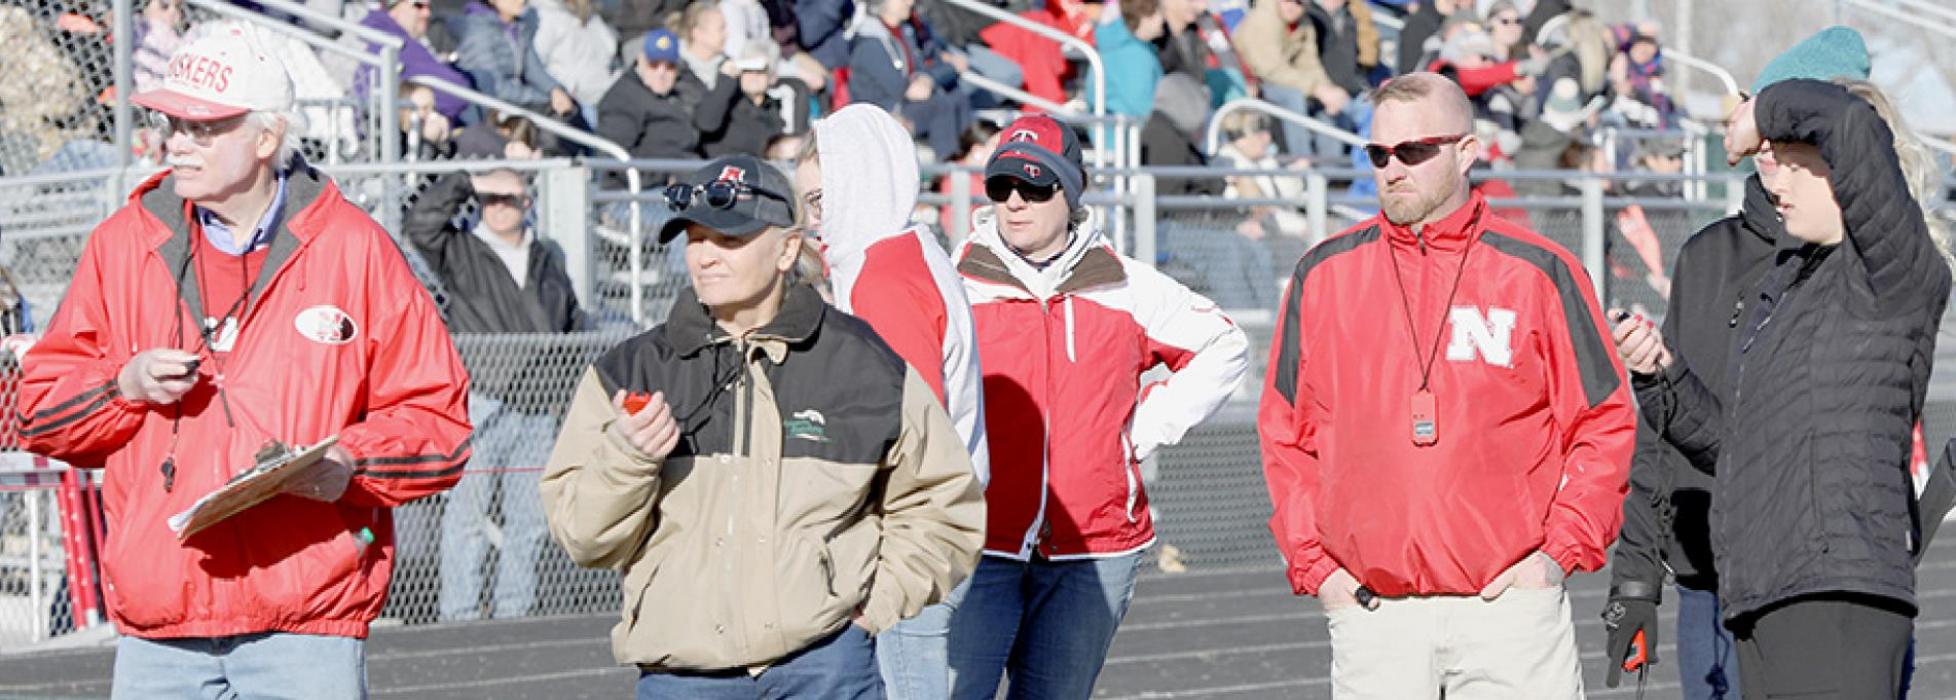 As with most school athletic events, volunteers are needed to keep things running smoothly. This group of timers were invaluable for the Ainsworth Relays.